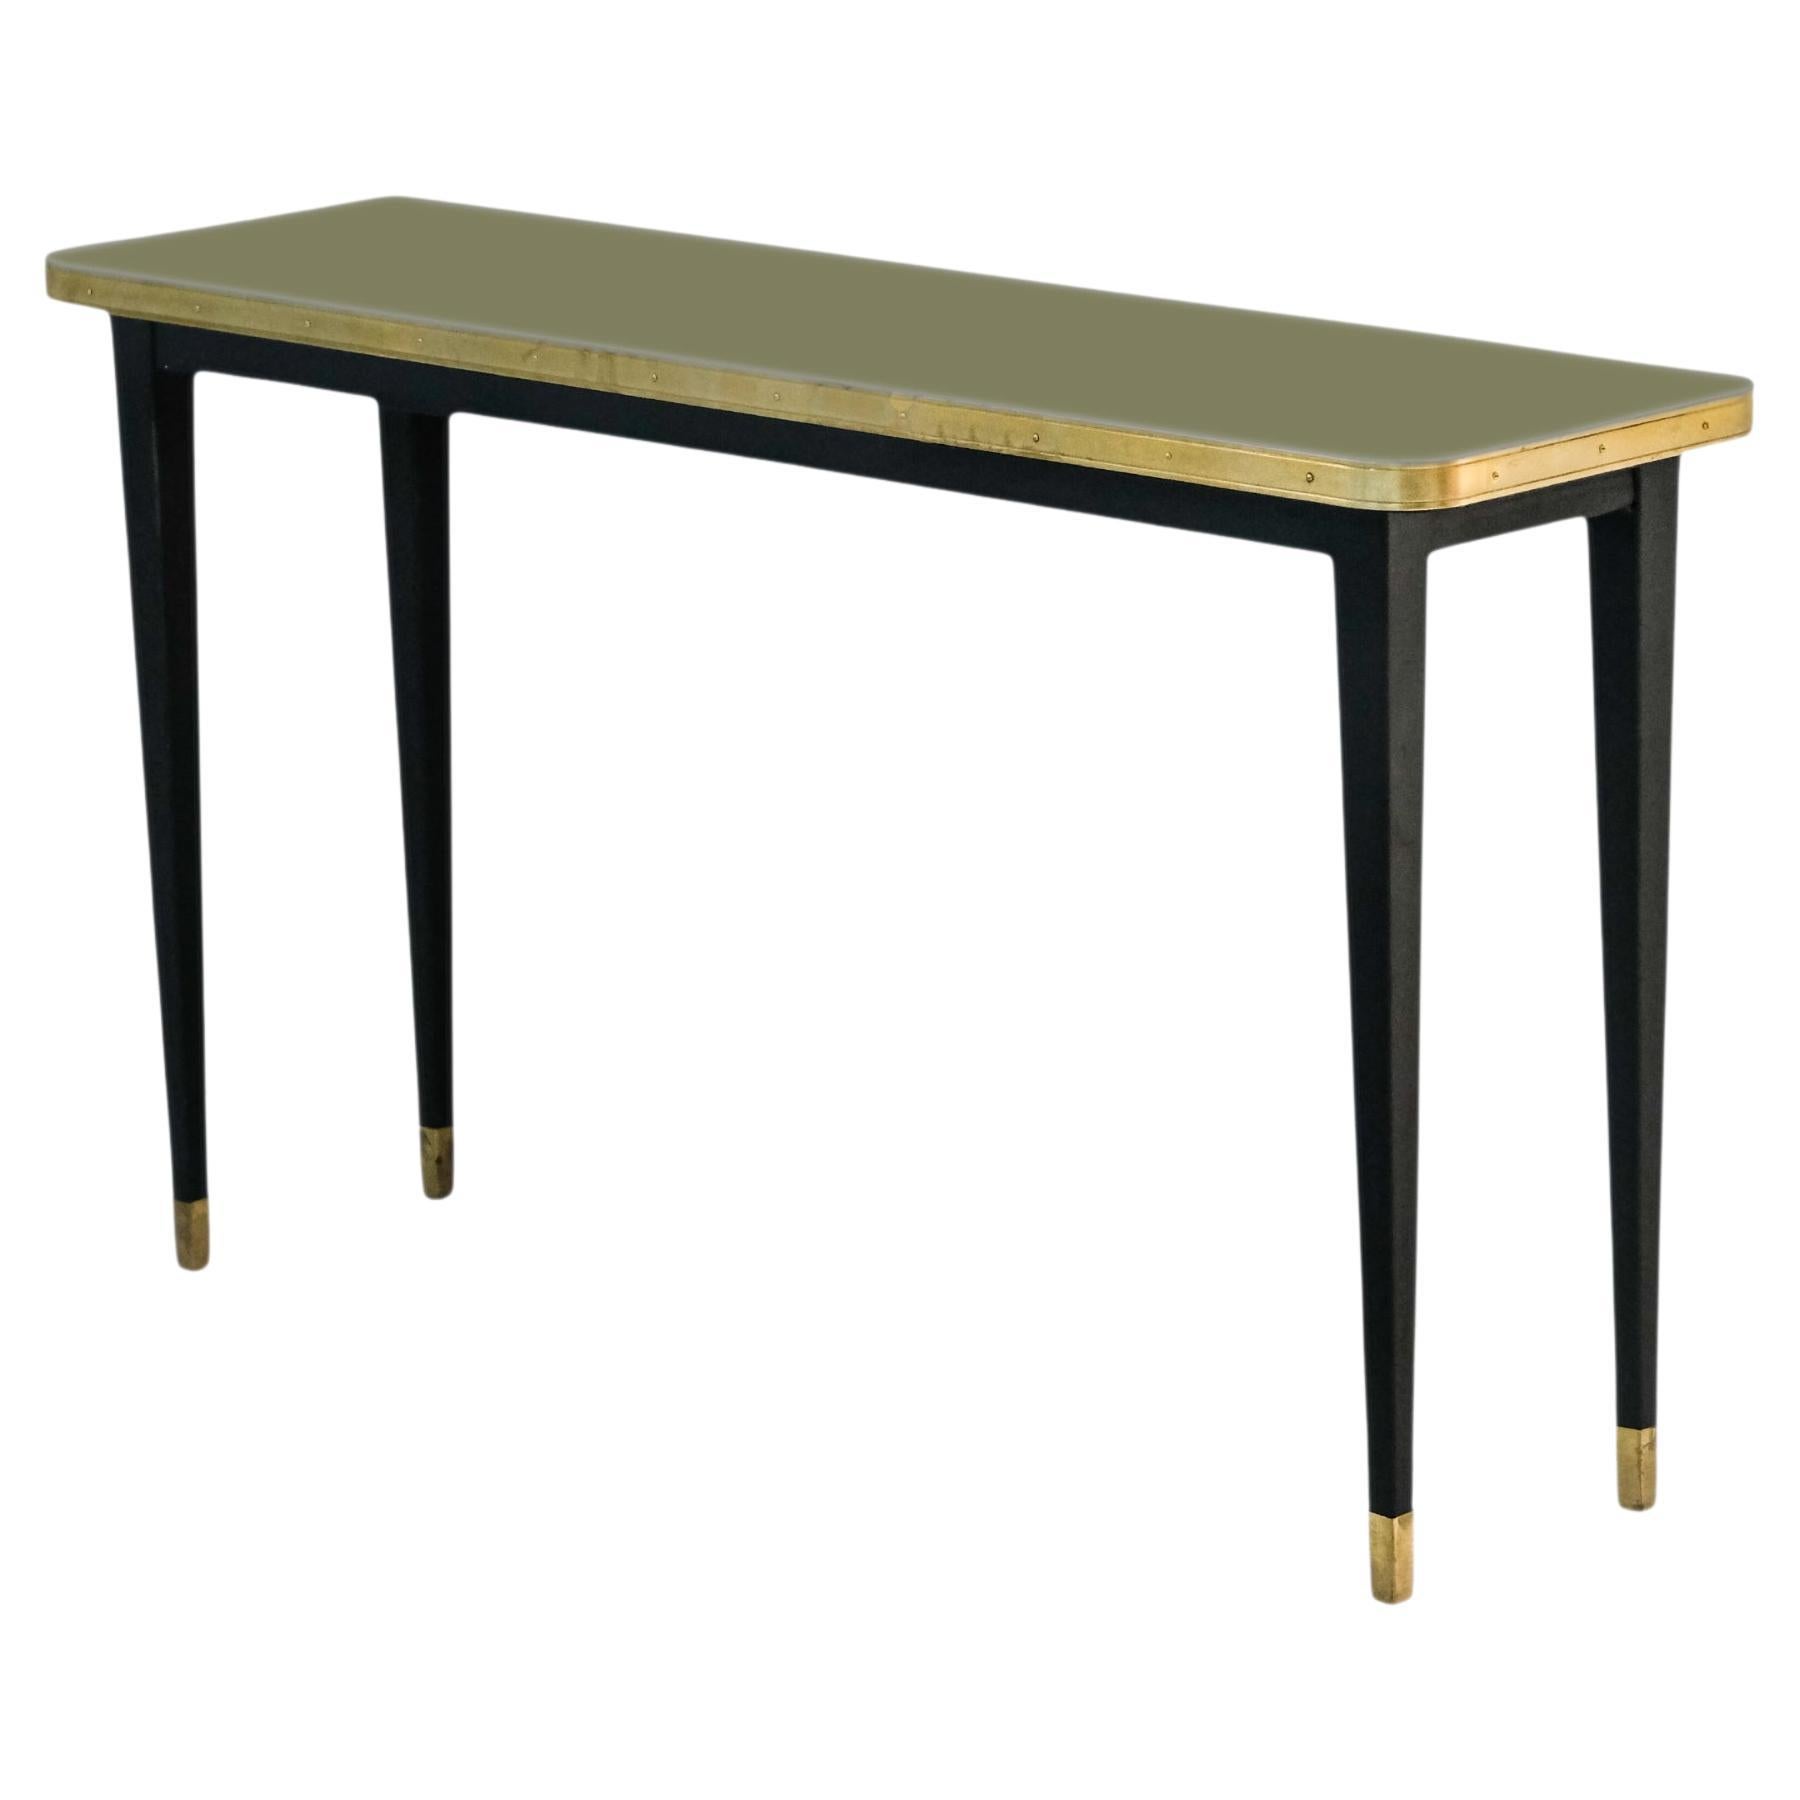 Mid-Century Modern Console Table, High Gloss Laminate & Brass Details, Burgundy - M For Sale